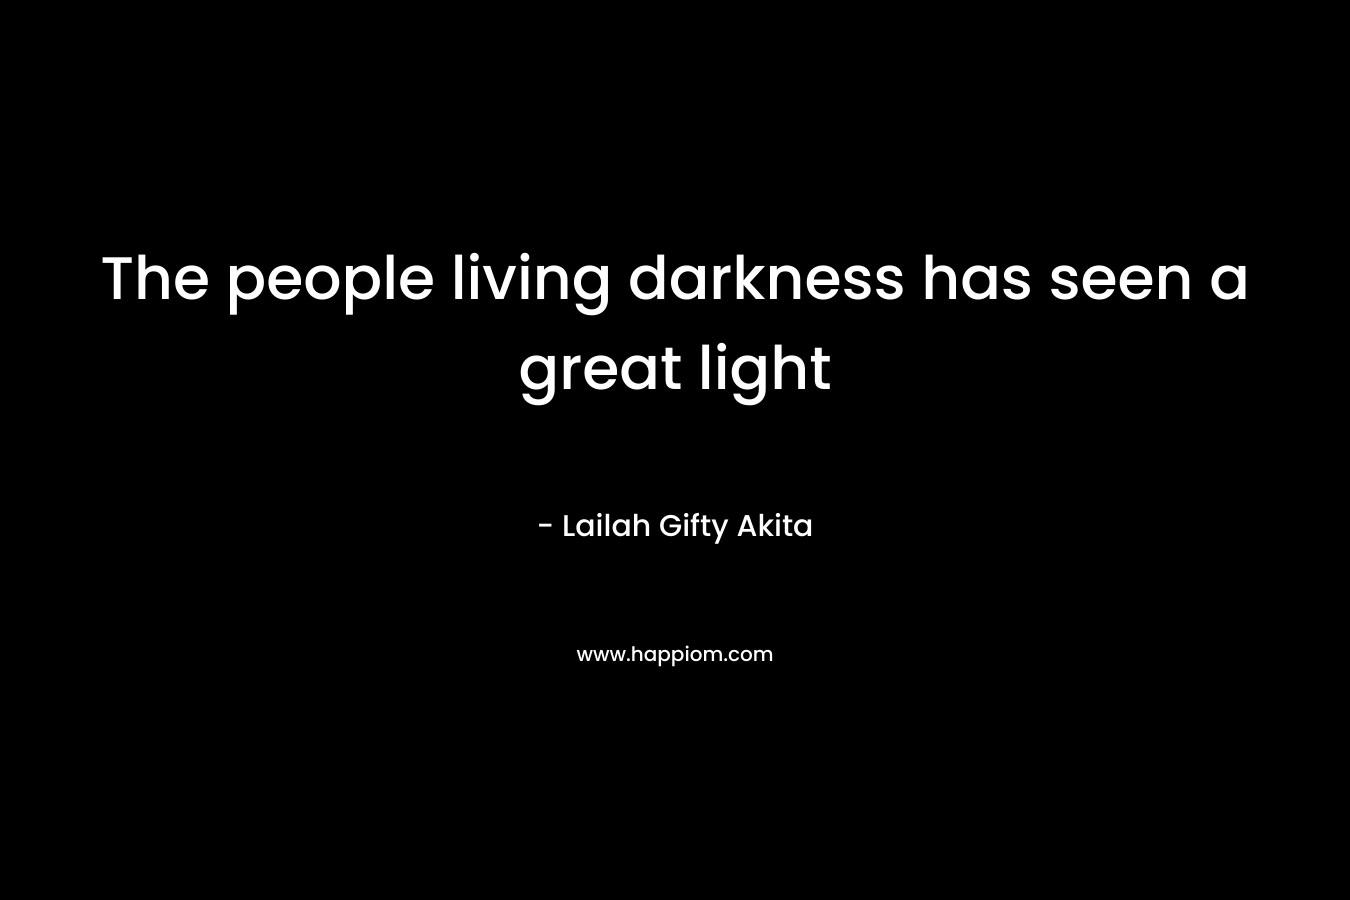 The people living darkness has seen a great light